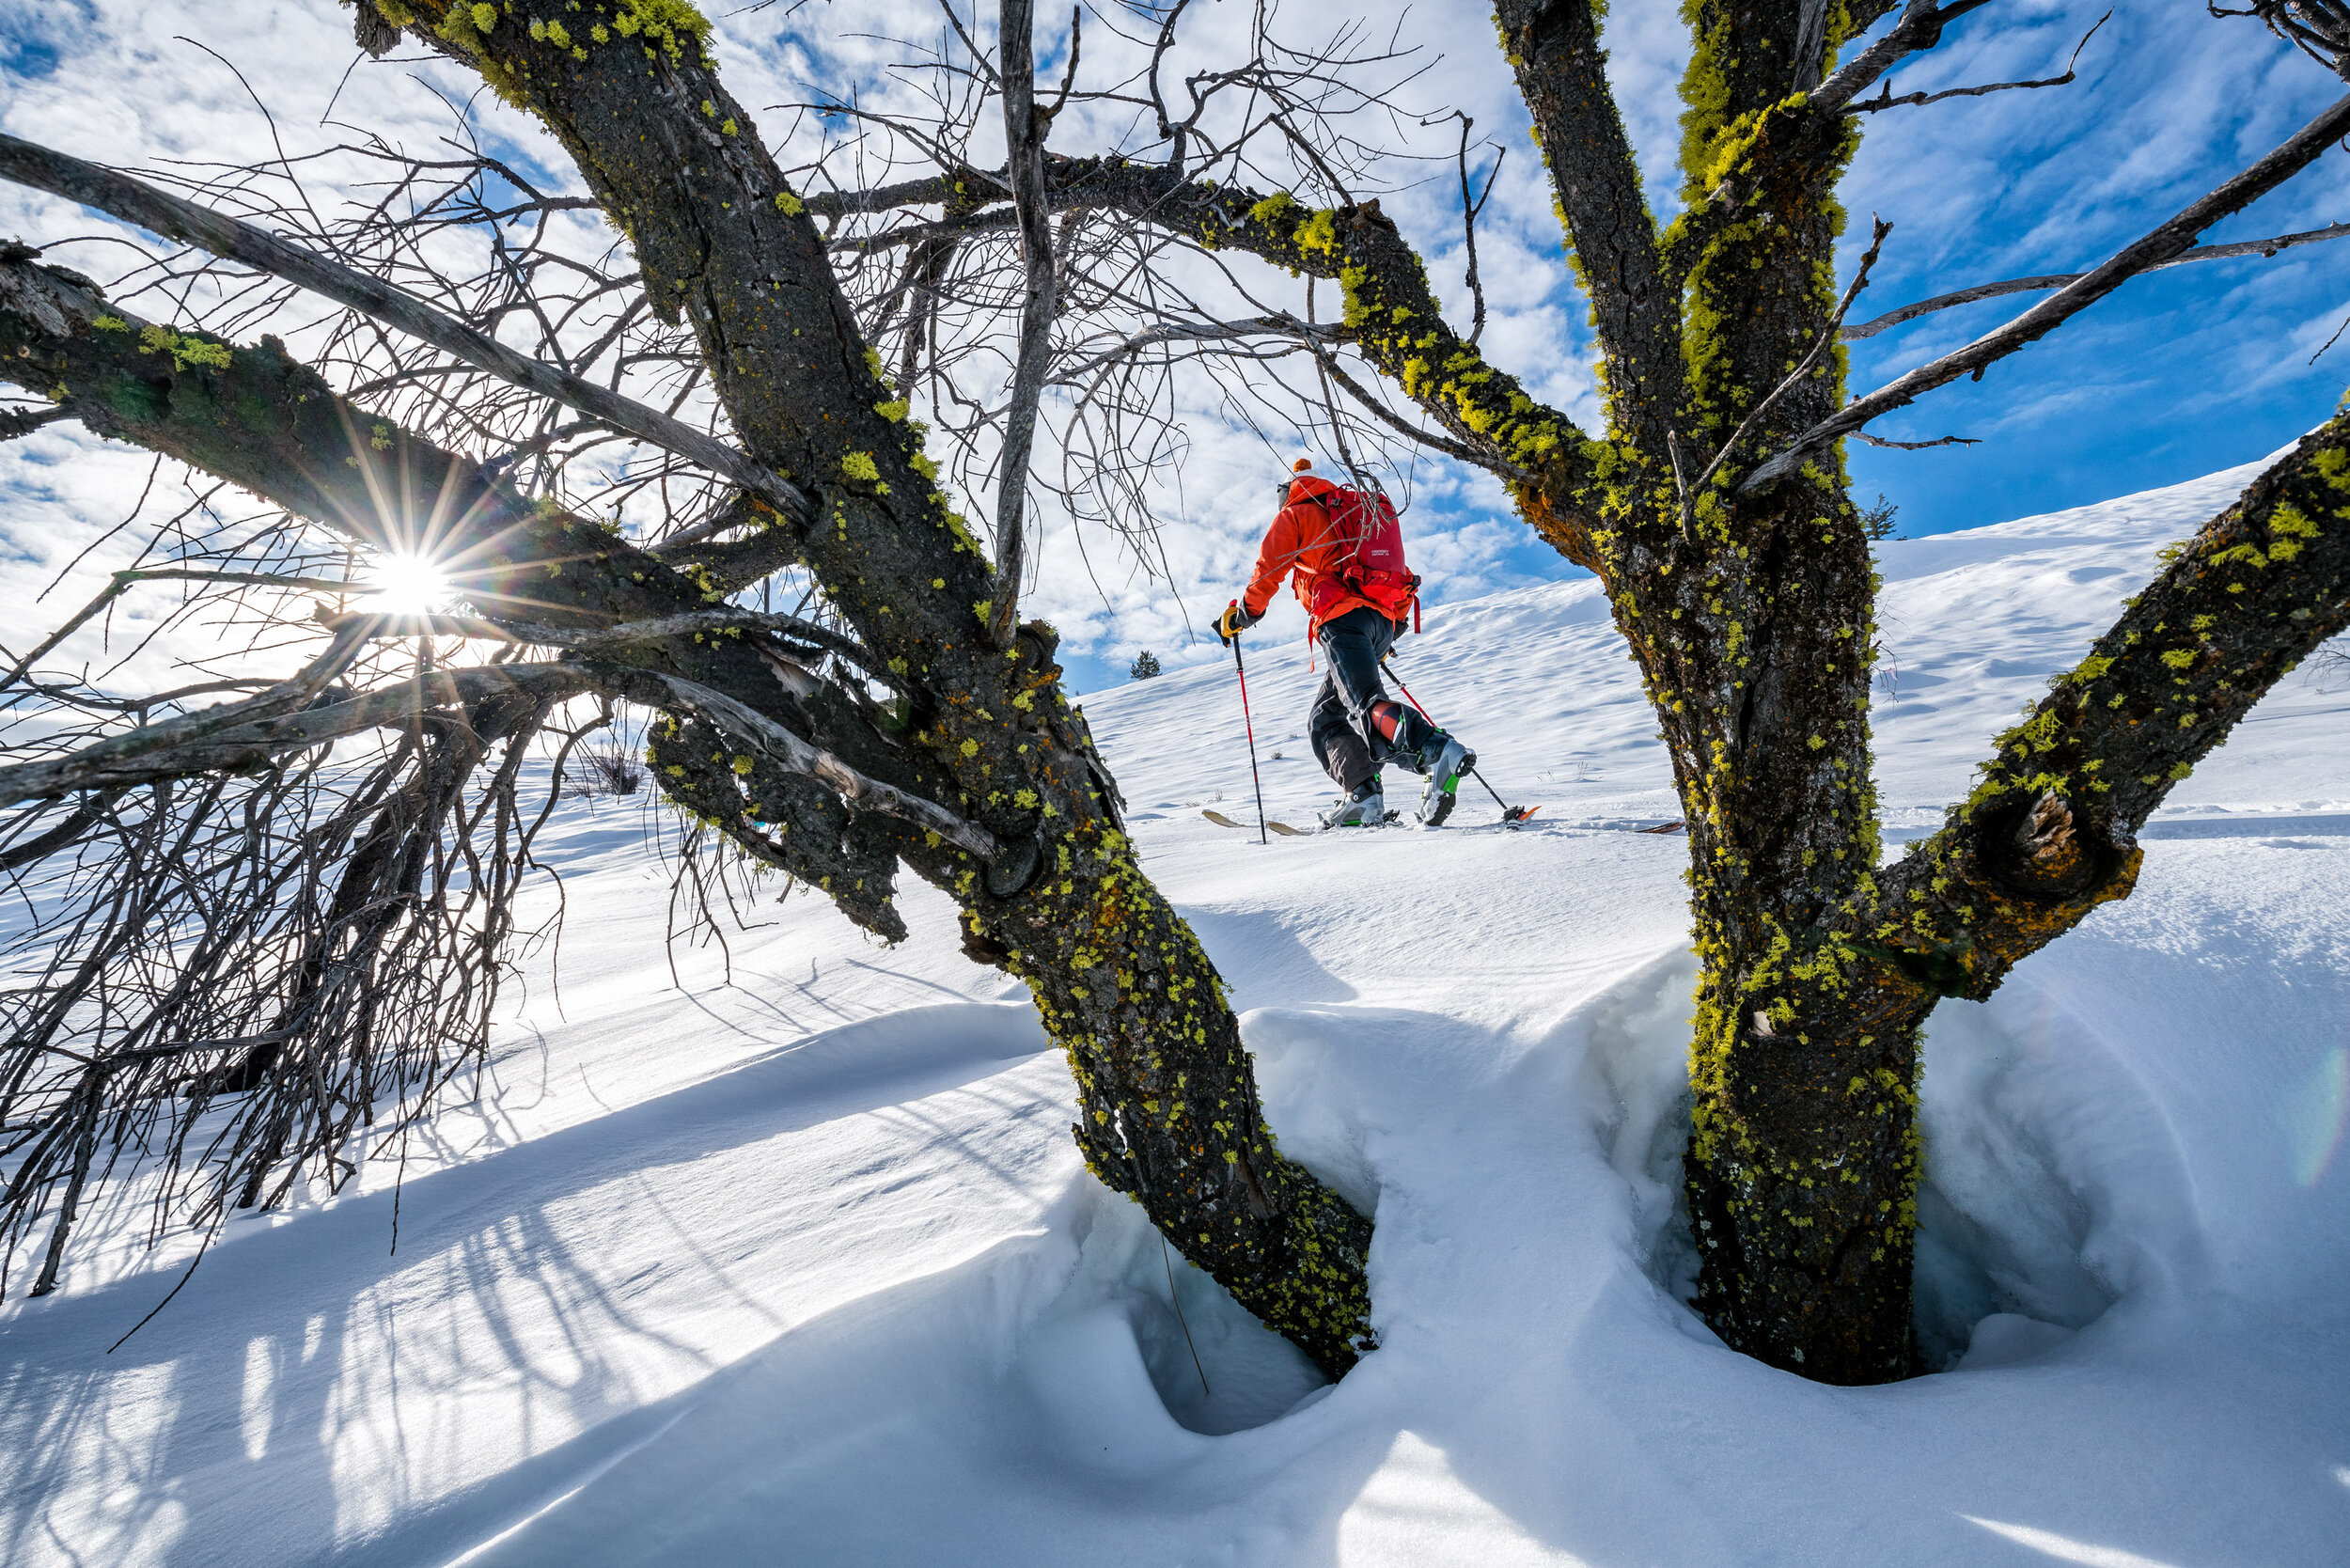  Adventure: Dave Summers backcountry ski touring in the Methow Valley on a sunny winter day, Winthrop, Washington 